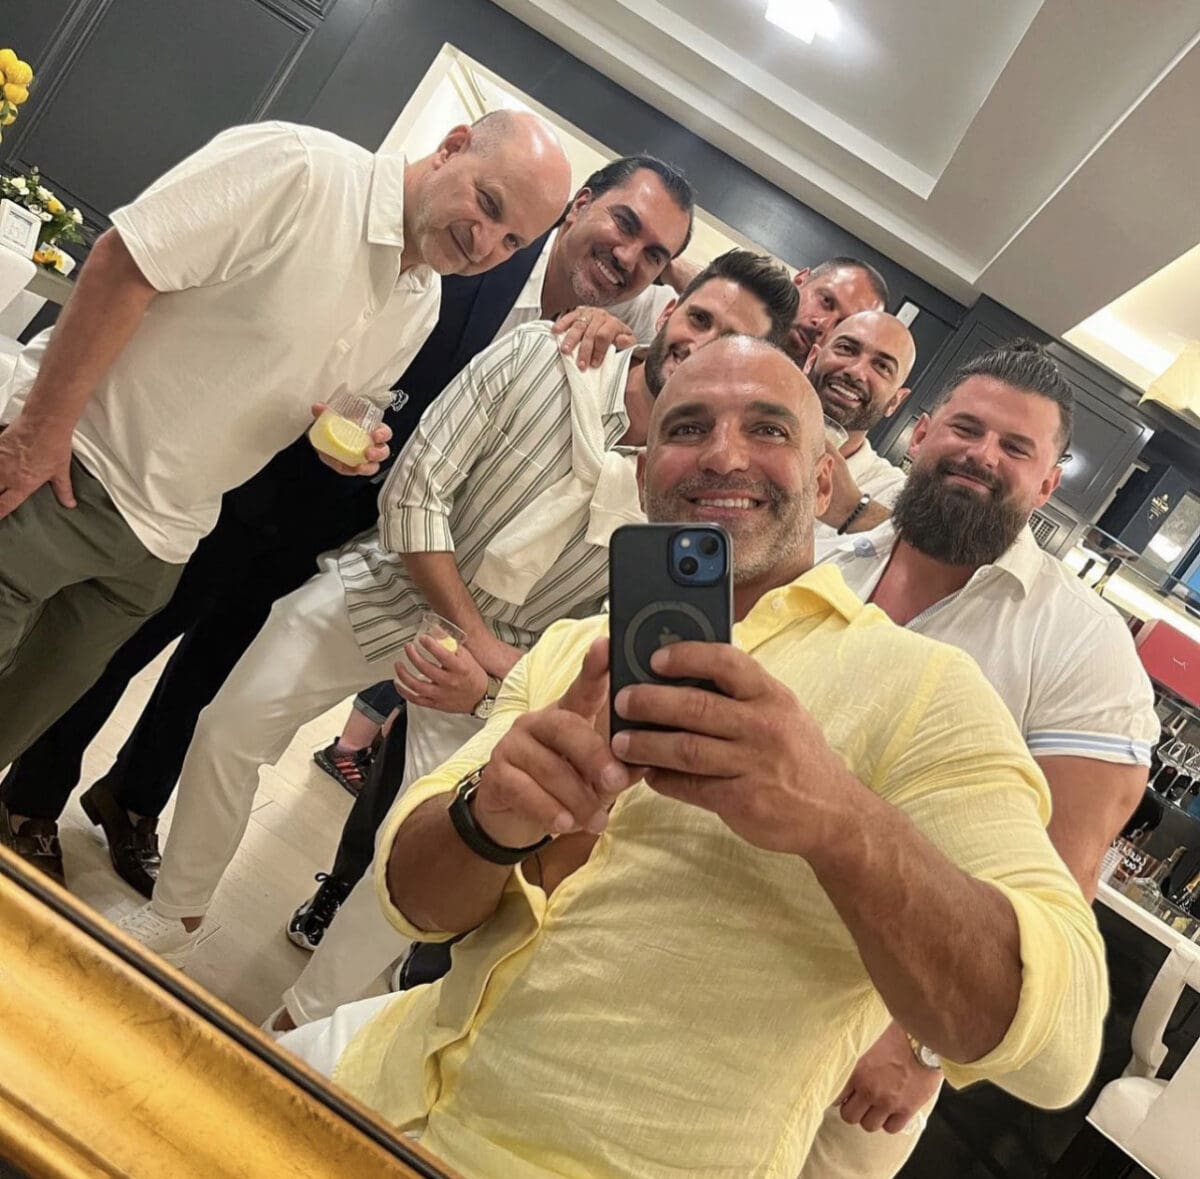 The men of RHONJ take a photo at Joe and Melissa's housewarming party